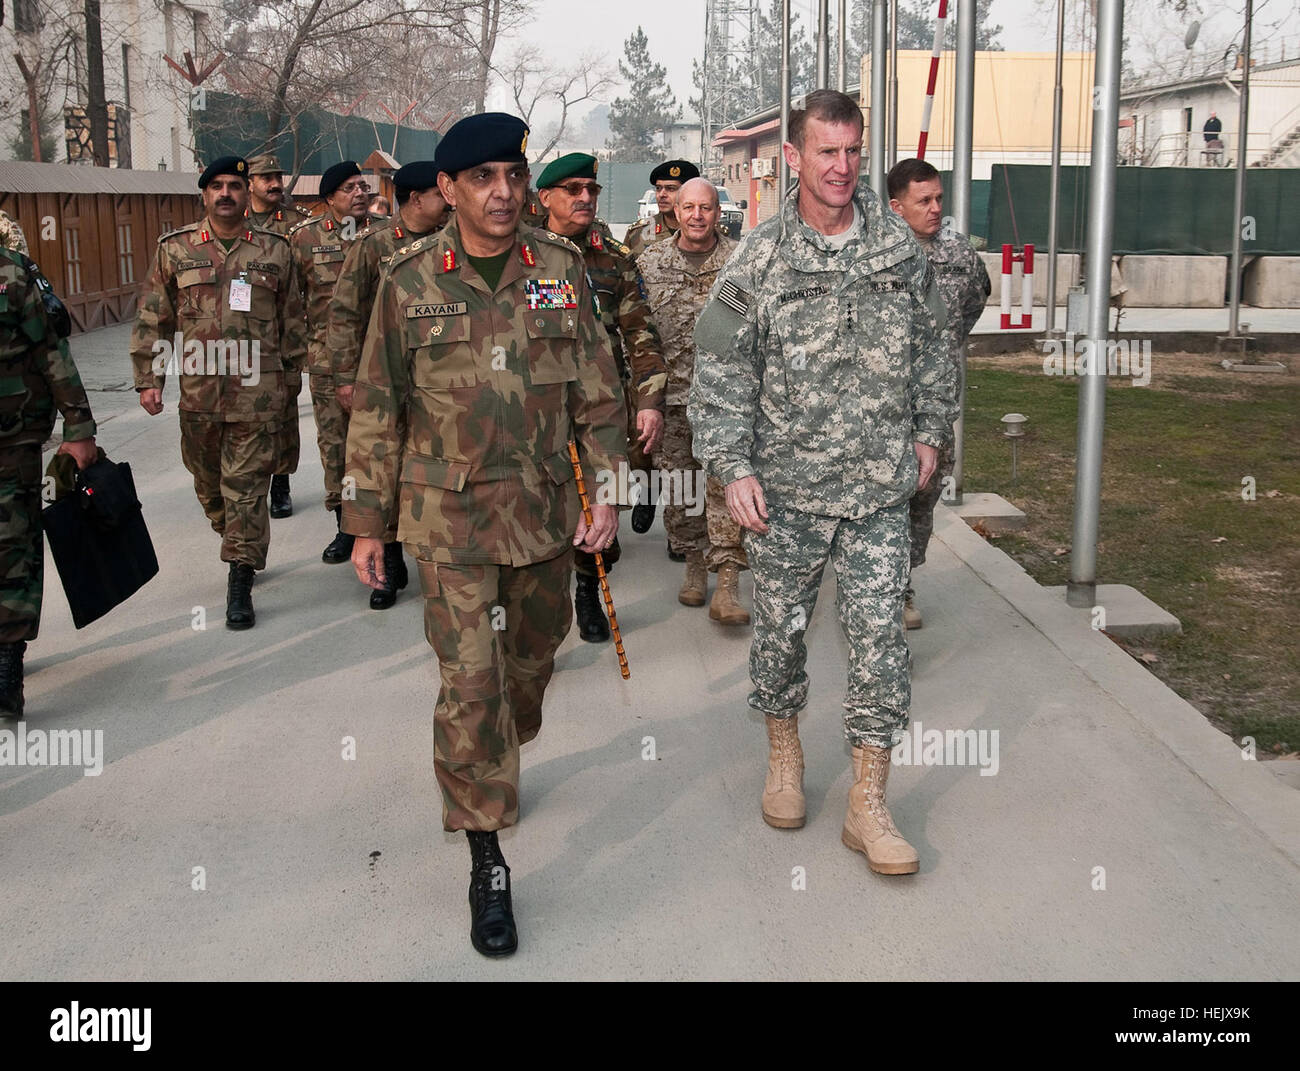 Gen. Ashfaq Parvez Kayani, Chief of Army Staff of the Pakistan Army and Gen. Stanley A. McChrystal, Commander of NATO International Security Assistance Force and U.S. Forces Afghanistan lead participants towards the conference area to meet for the 29th Tripartite Commission meeting.  The Tripartite Commission, comprised of senior military and diplomatic representatives from Afghanistan, Pakistan and the United States. Photo by U.S. Army Sgt. David E. Alvarado. (RELEASED) US-Afghan-Pakistani military men Stock Photo